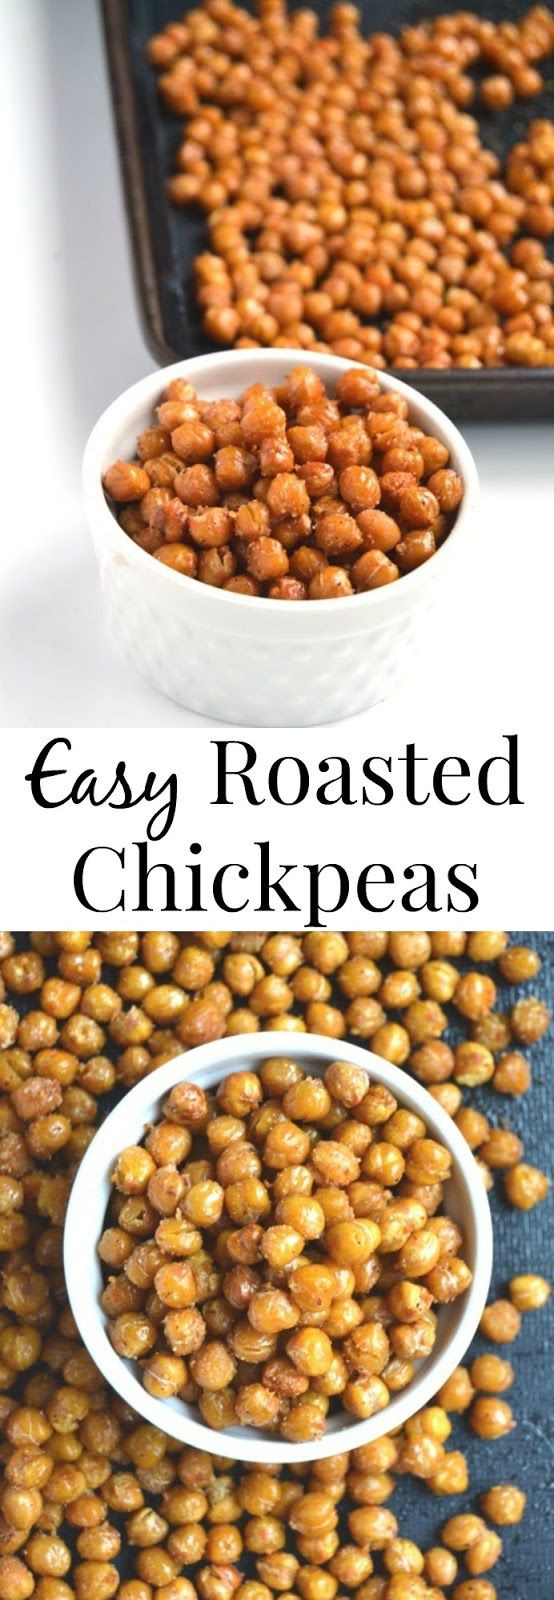 Healthy Filling Snacks
 Roasted Chickpeas